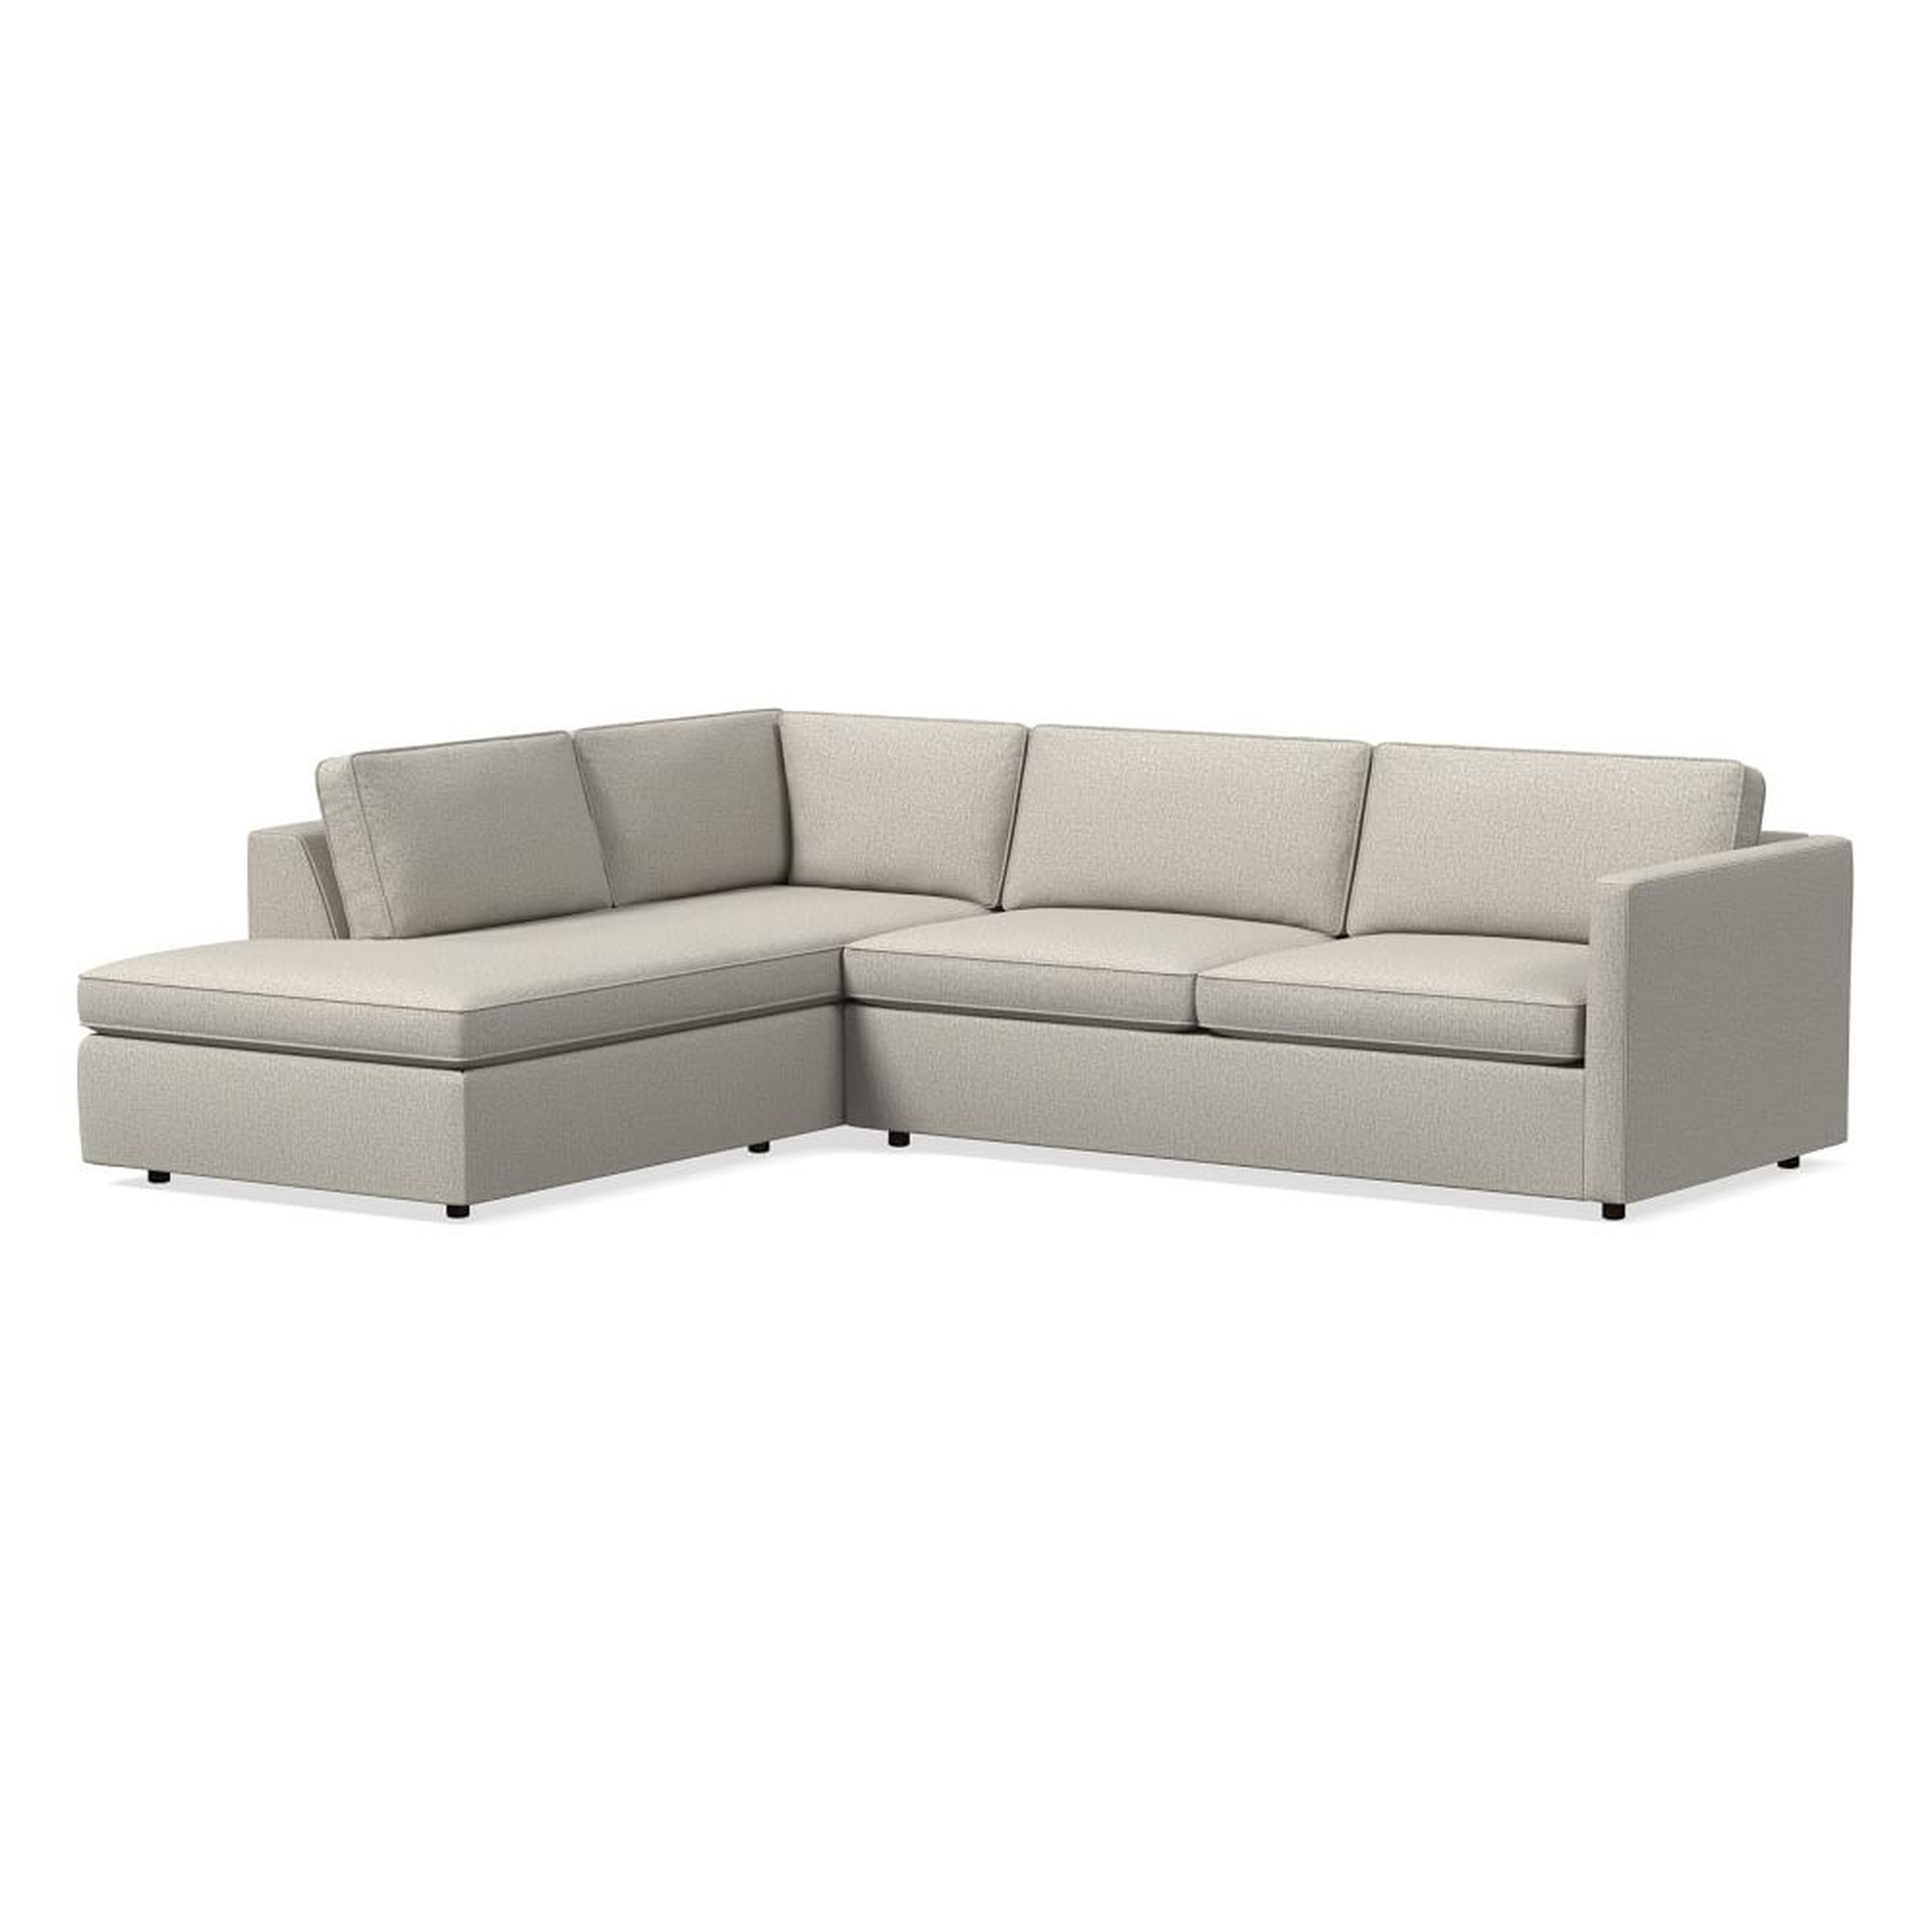 Harris Sectional Set 12: RA 75" Sofa, LA Terminal Chaise, Poly , Performance Twill, Dove, Concealed Supports - West Elm